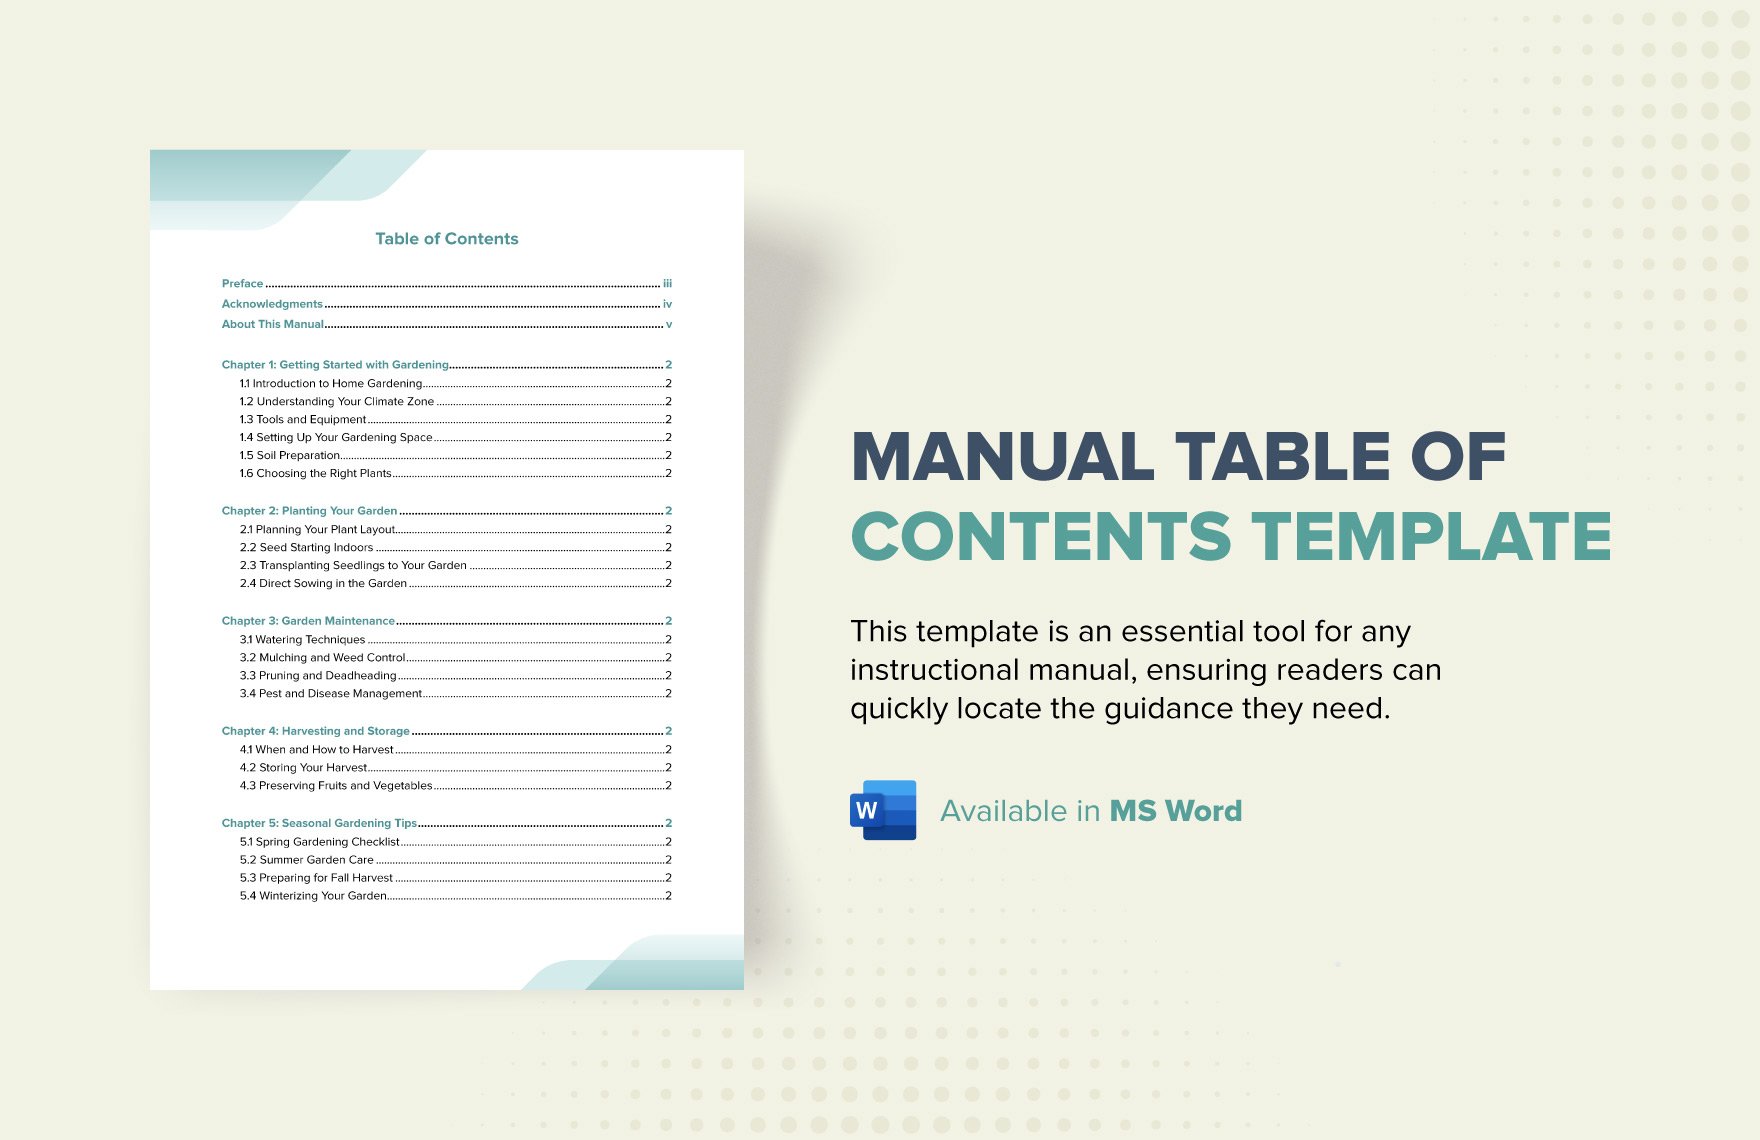 Manual Table of Contents Template